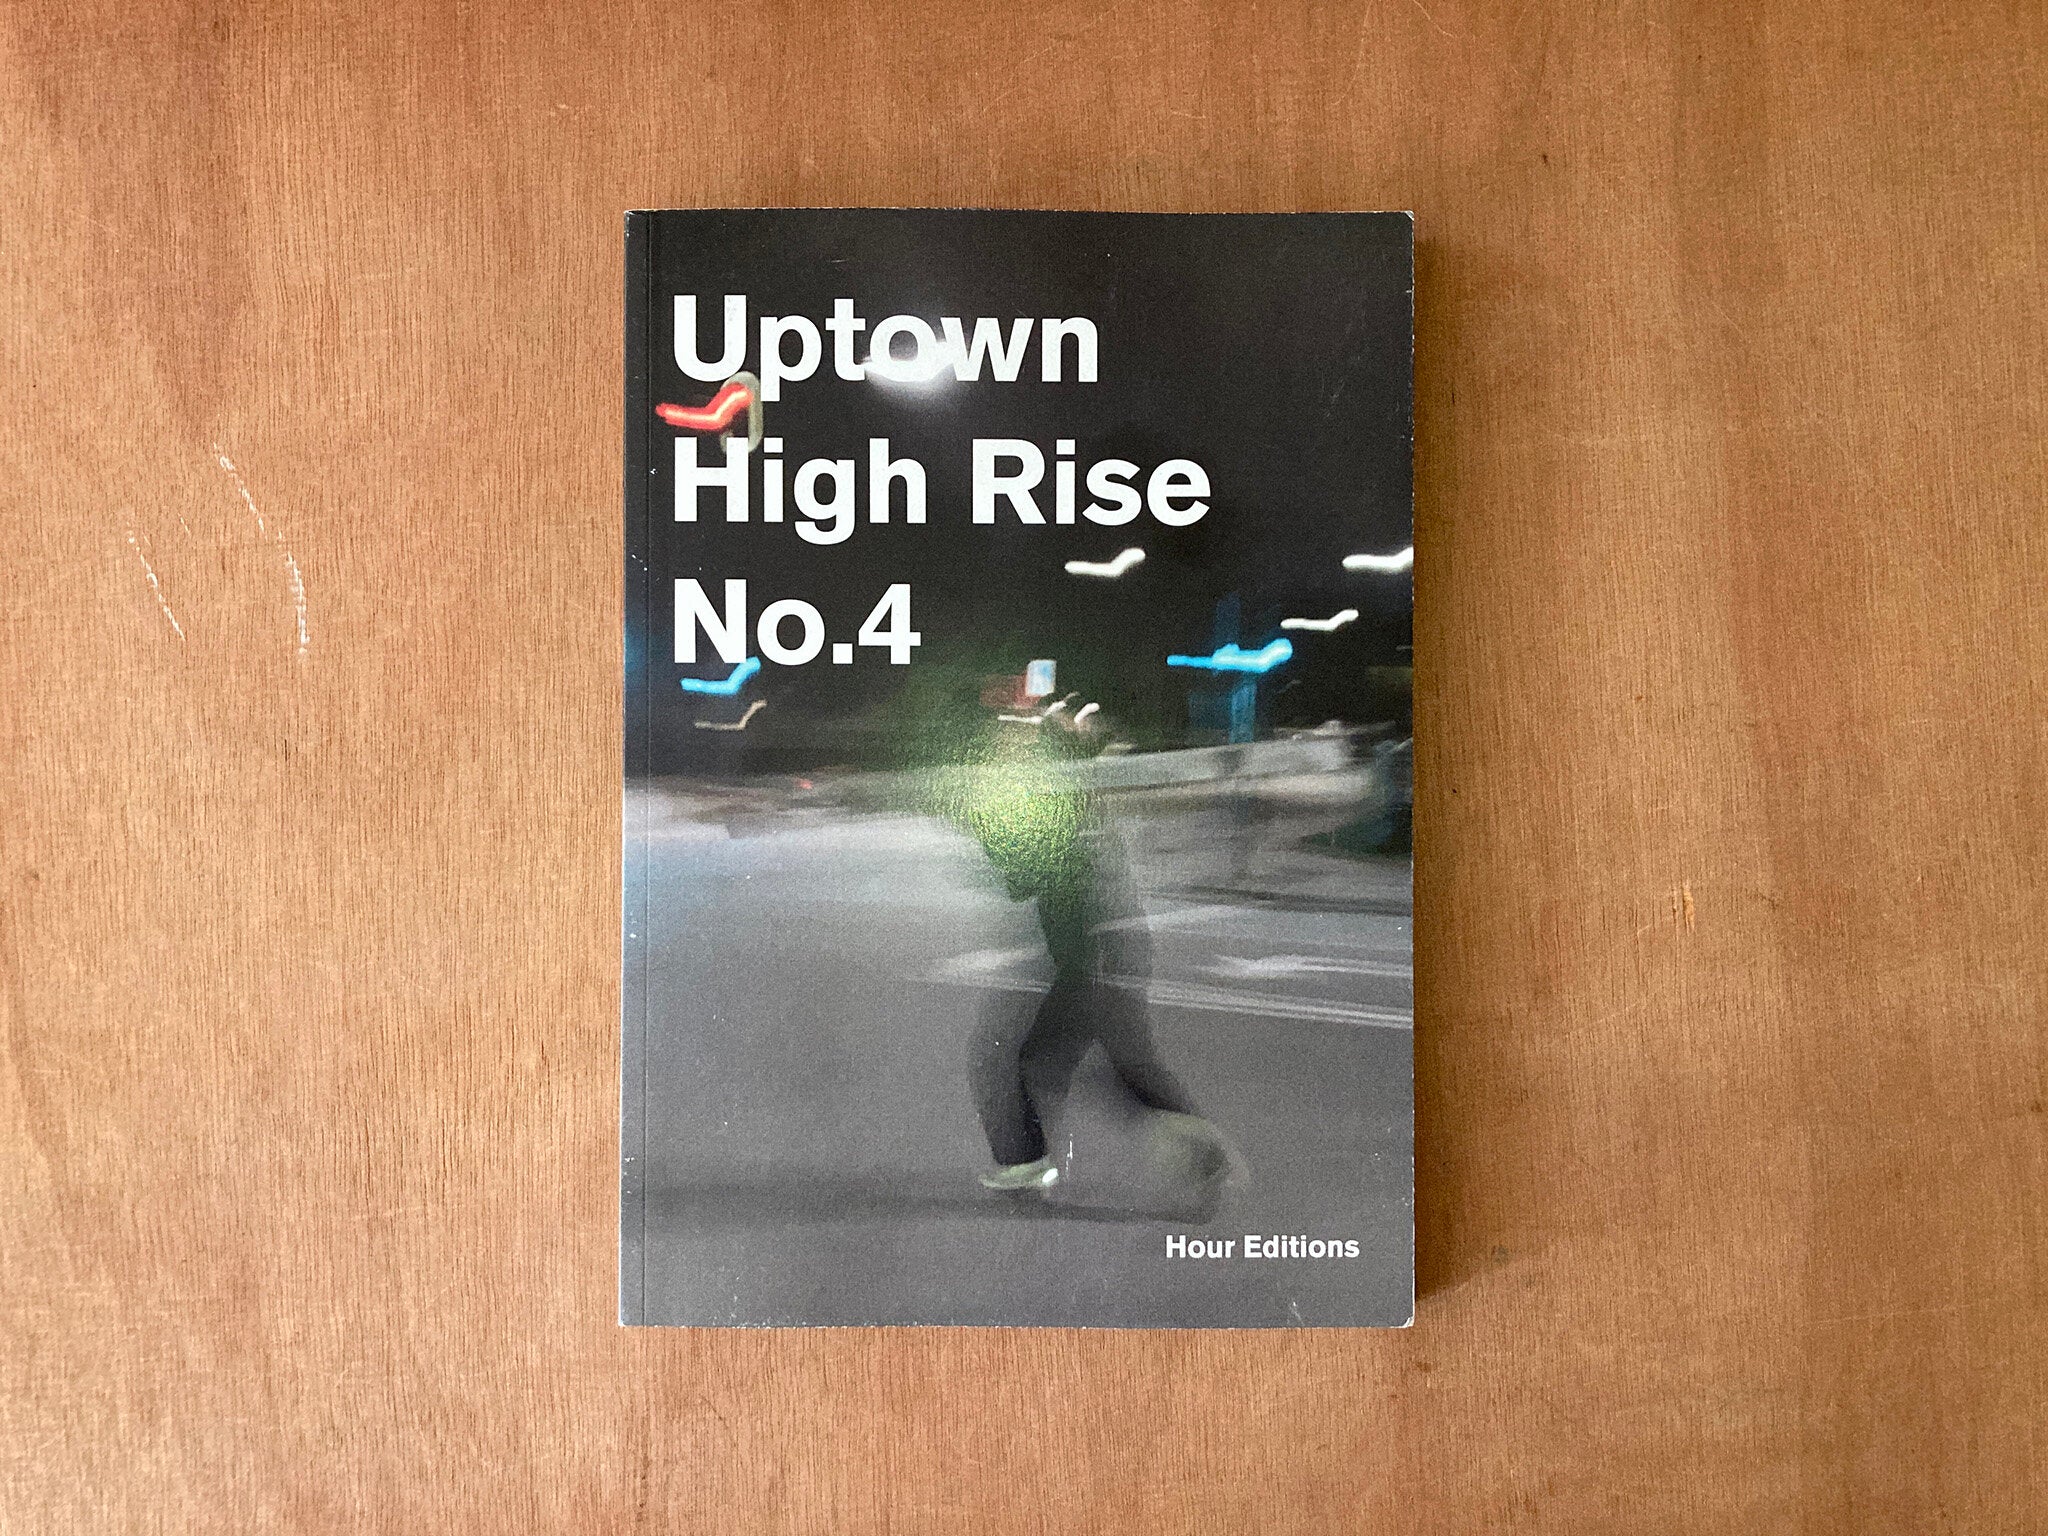 UPTOWN HIGH RISE NO.4 by Various